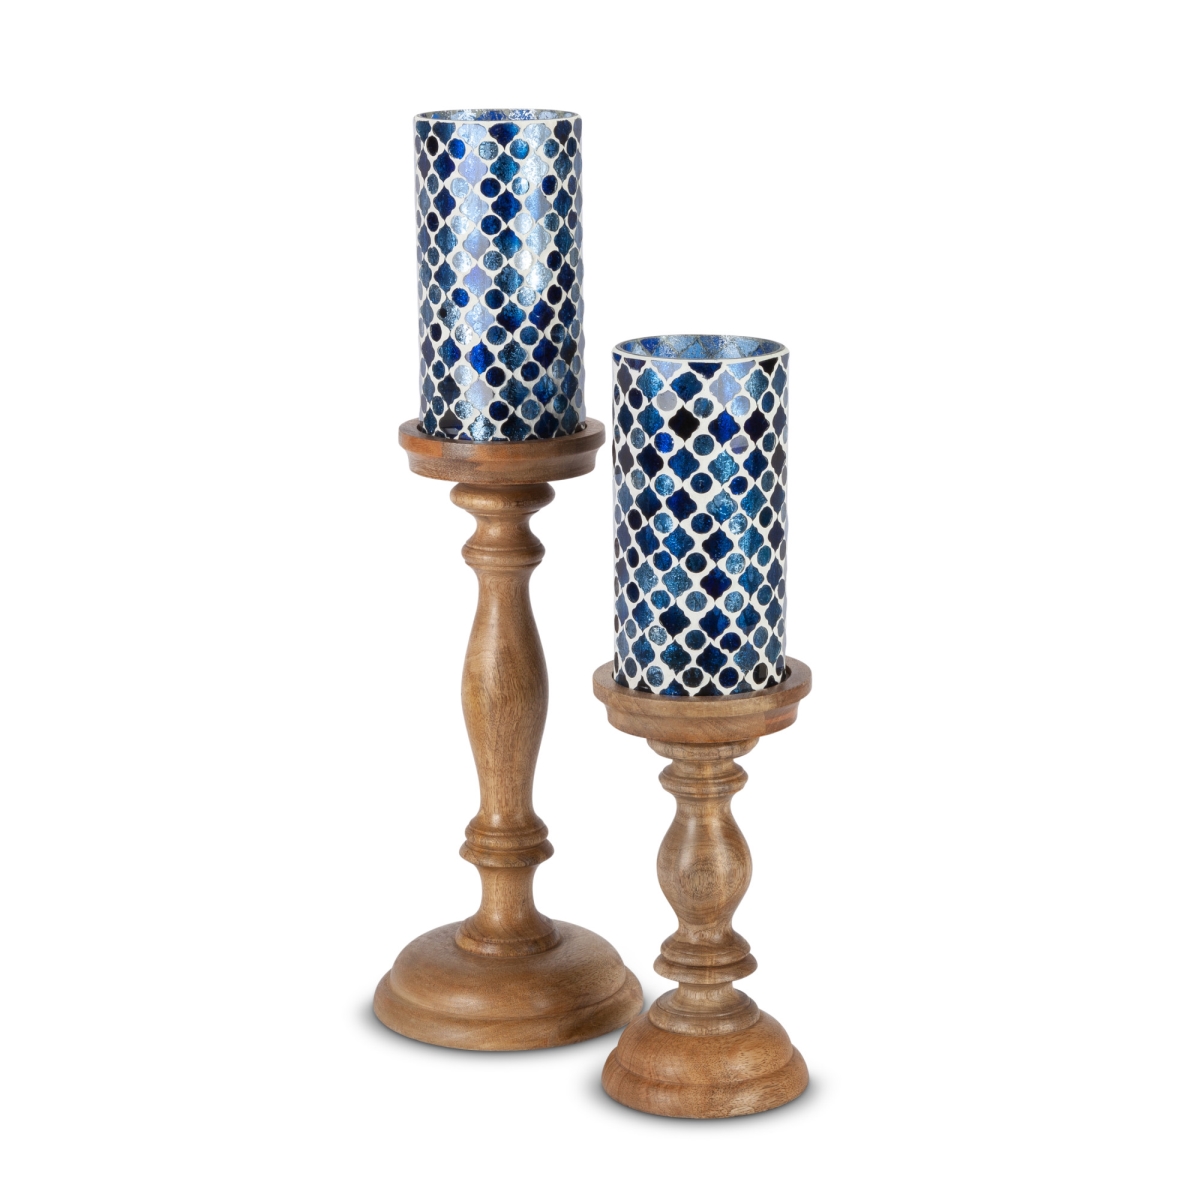 Gerson 94650ec Assorted-size Blue Mosaic Glass Candle Holders With Mango Wood Stands - Set Of 2